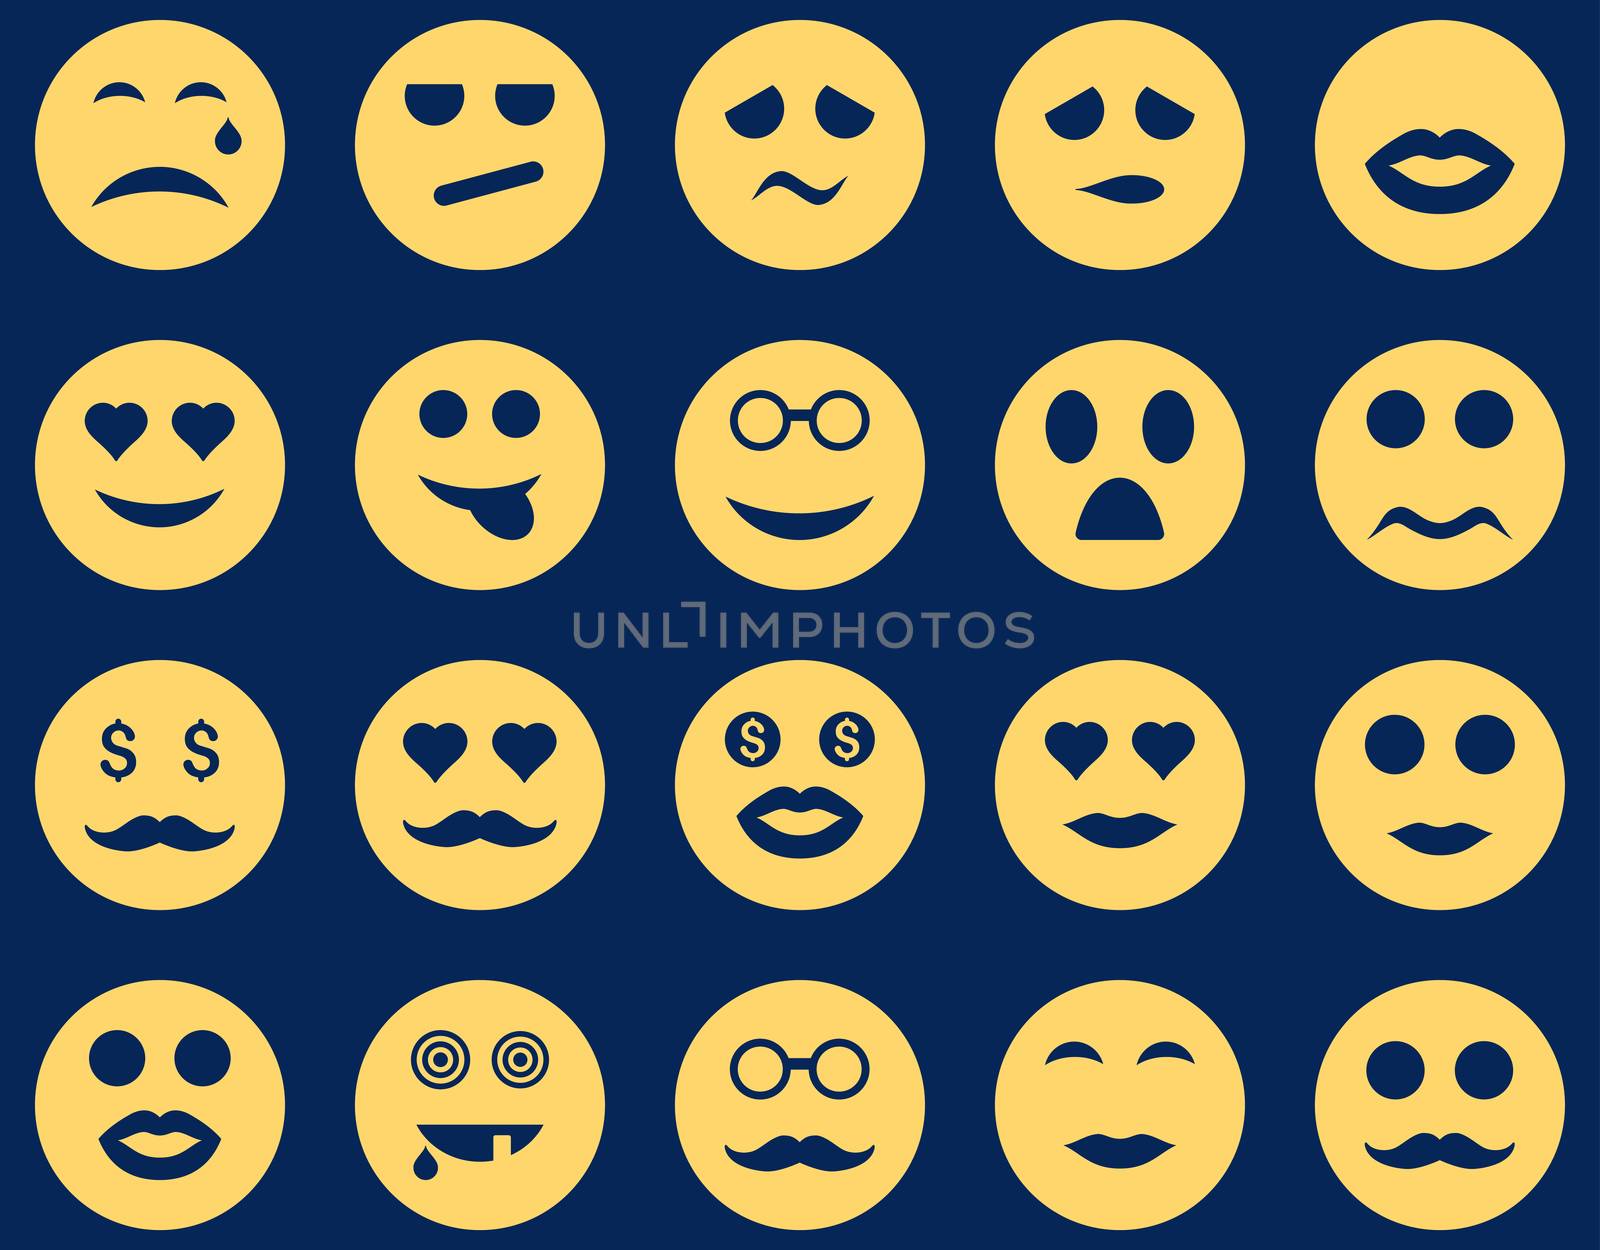 Smile and emotion icons. Glyph set style is flat images, yellow symbols, isolated on a blue background.